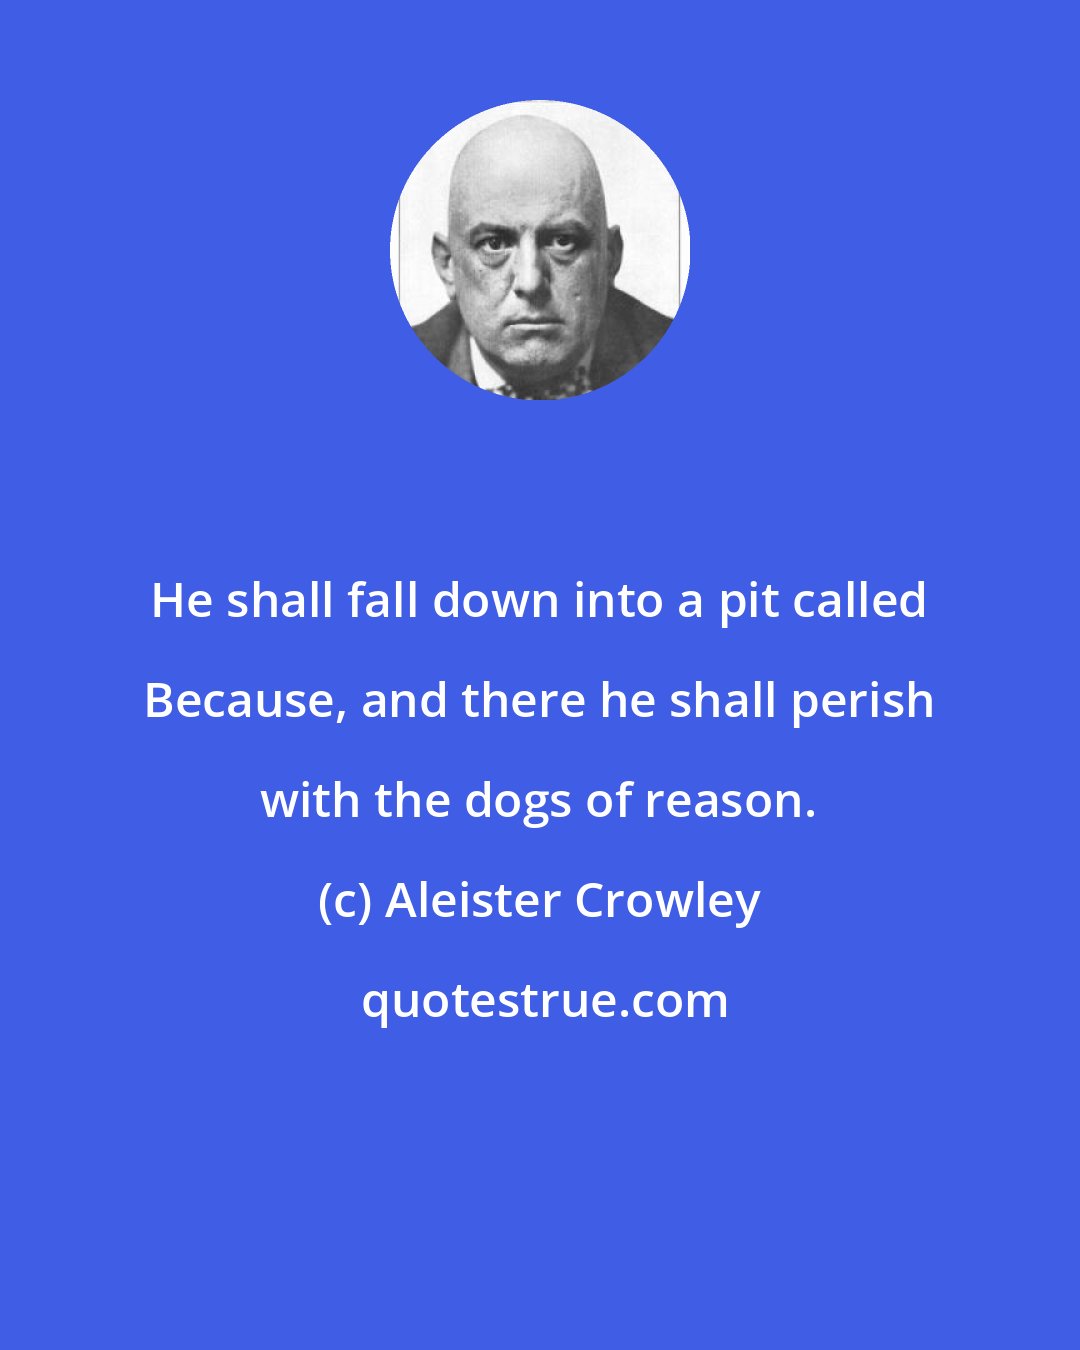 Aleister Crowley: He shall fall down into a pit called Because, and there he shall perish with the dogs of reason.